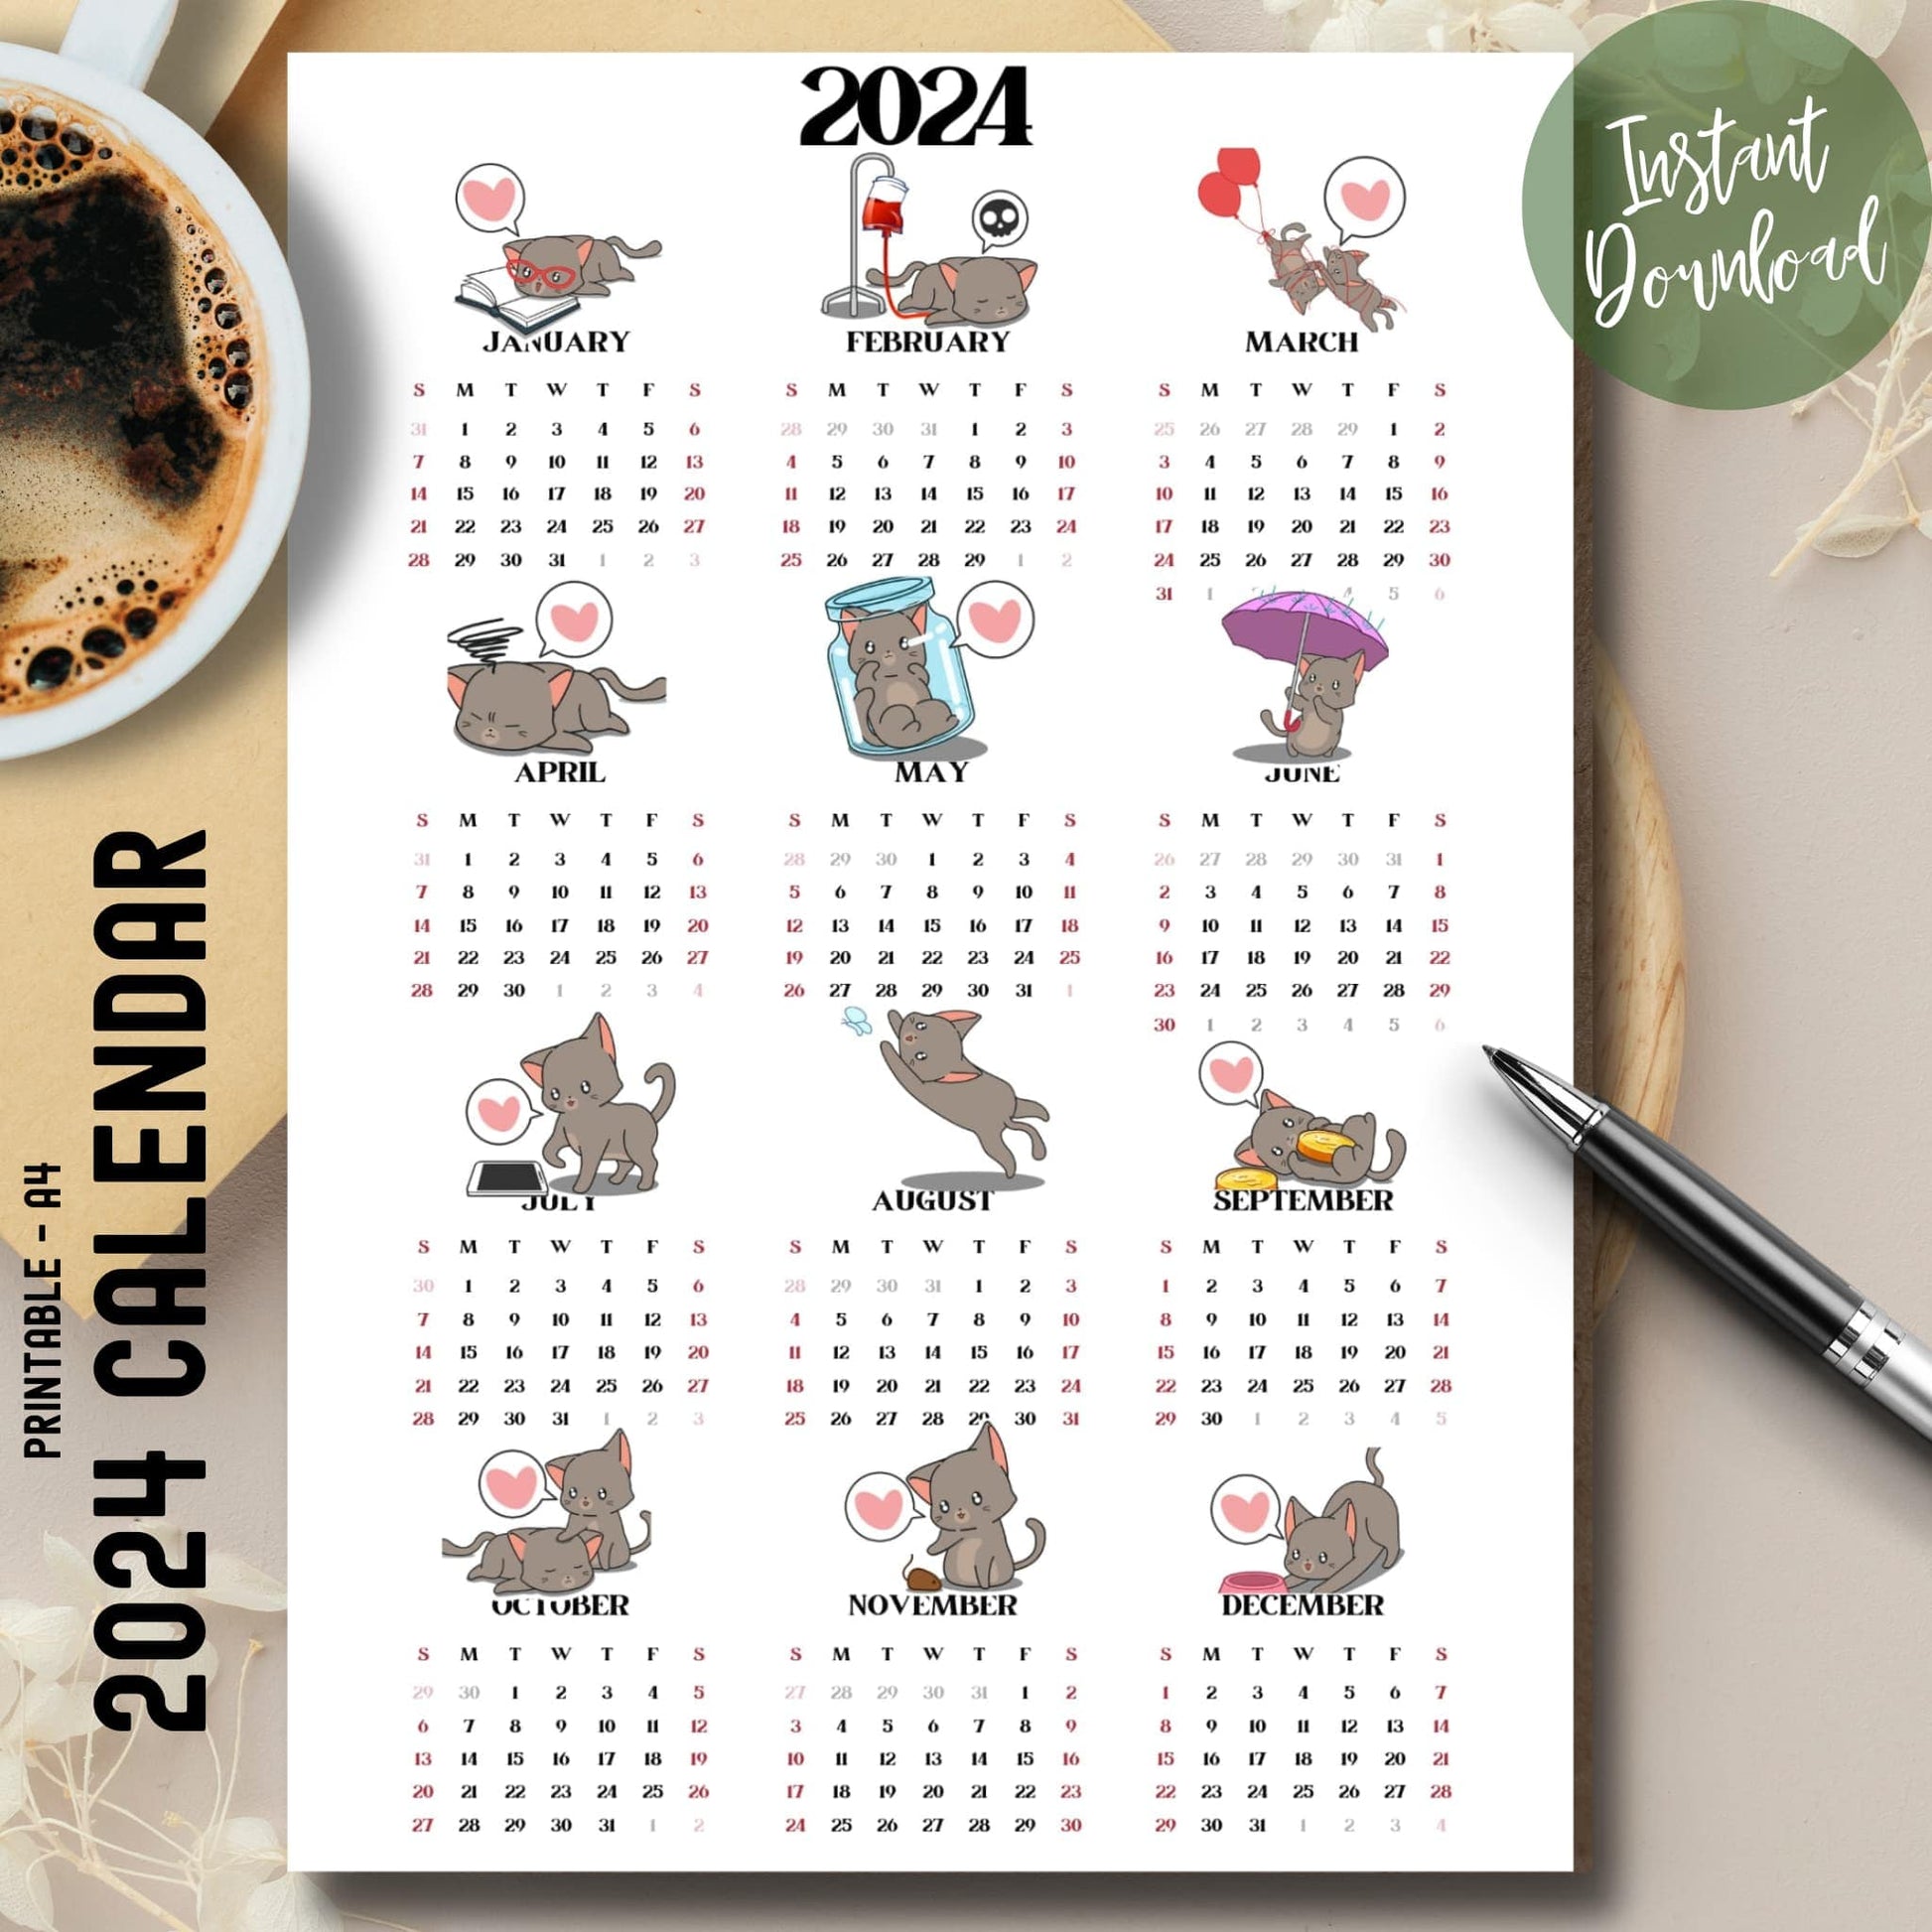 Cute cat illustrated 2024 full year calendar on brown desk with coffee cup on left and pen on right.